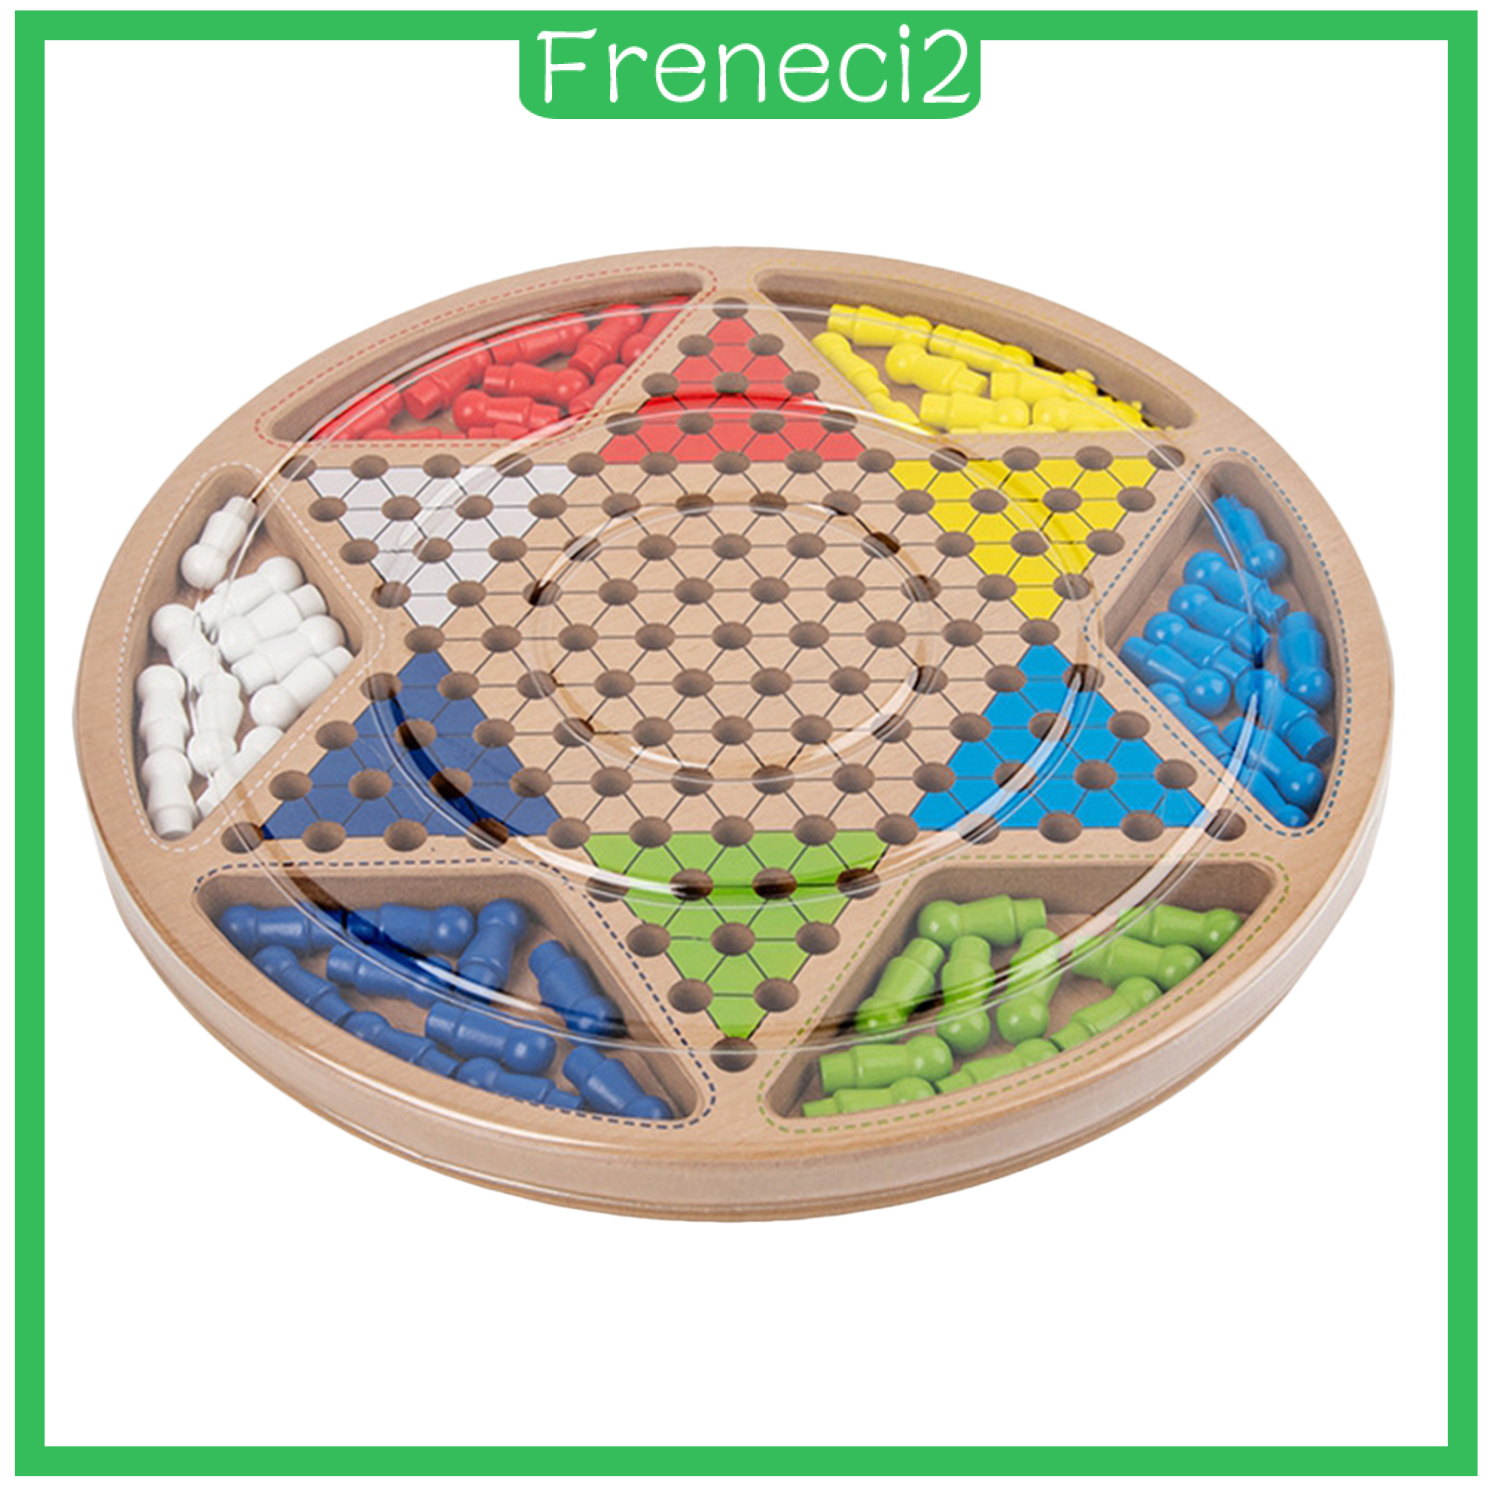 [FRENECI2]2 in 1 Wooden Chinese Checkers Board Game Set with Colorful Pegs Style1